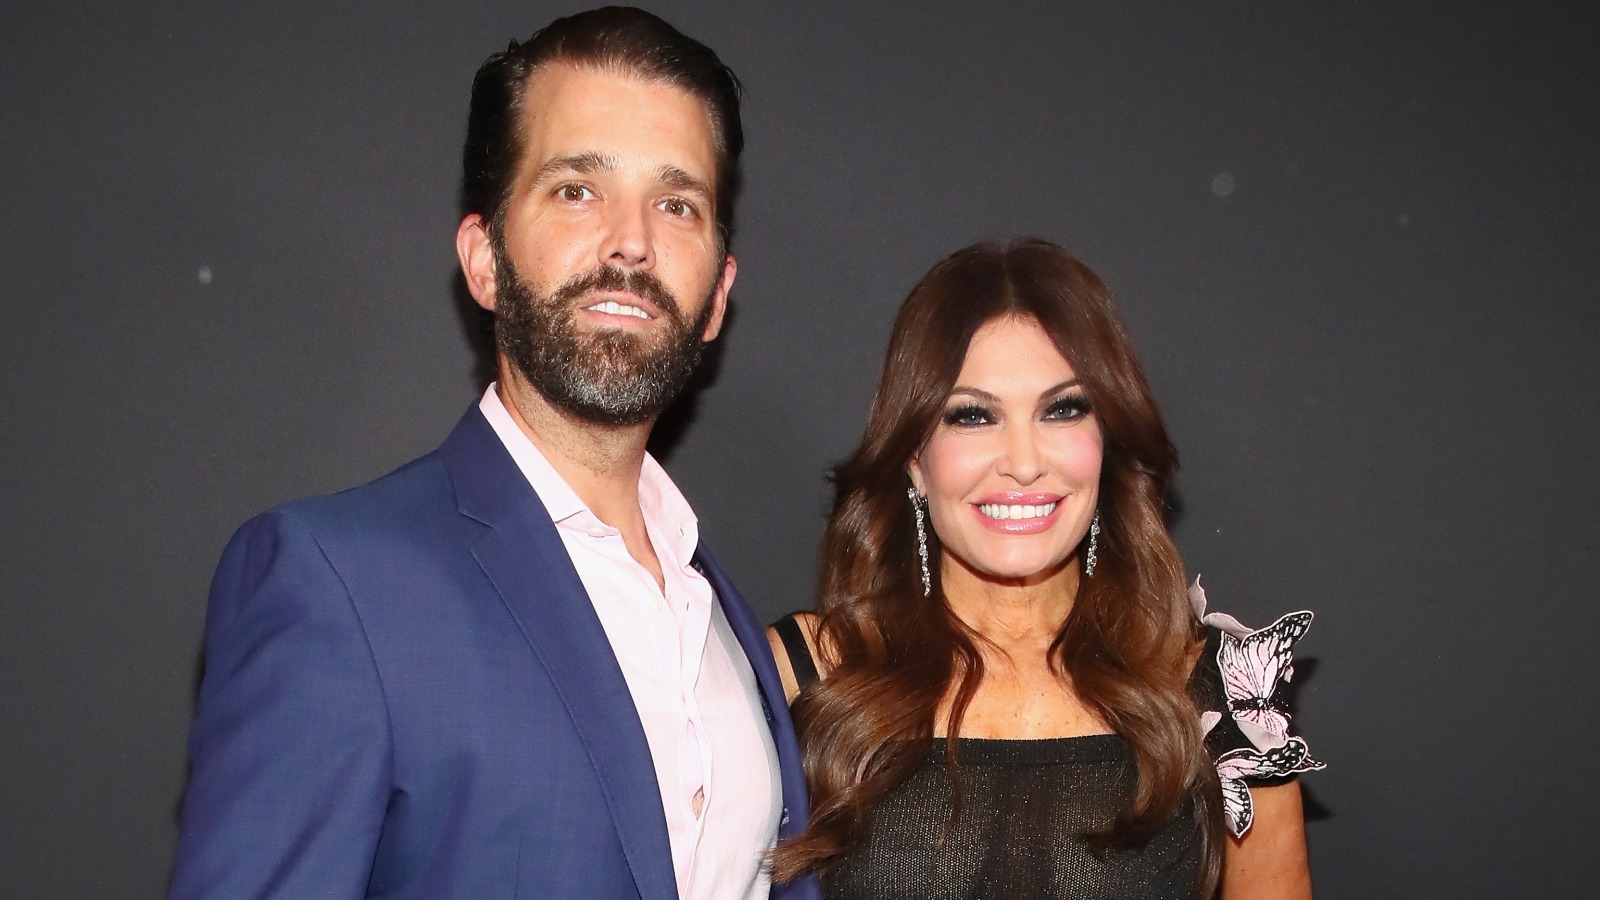 Kimberly Guilfoyle Sex Porn - Is Kimberly Guilfoyle interested in Donald Trump Jr. and the Trump family  strictly for political reasons? - Quora